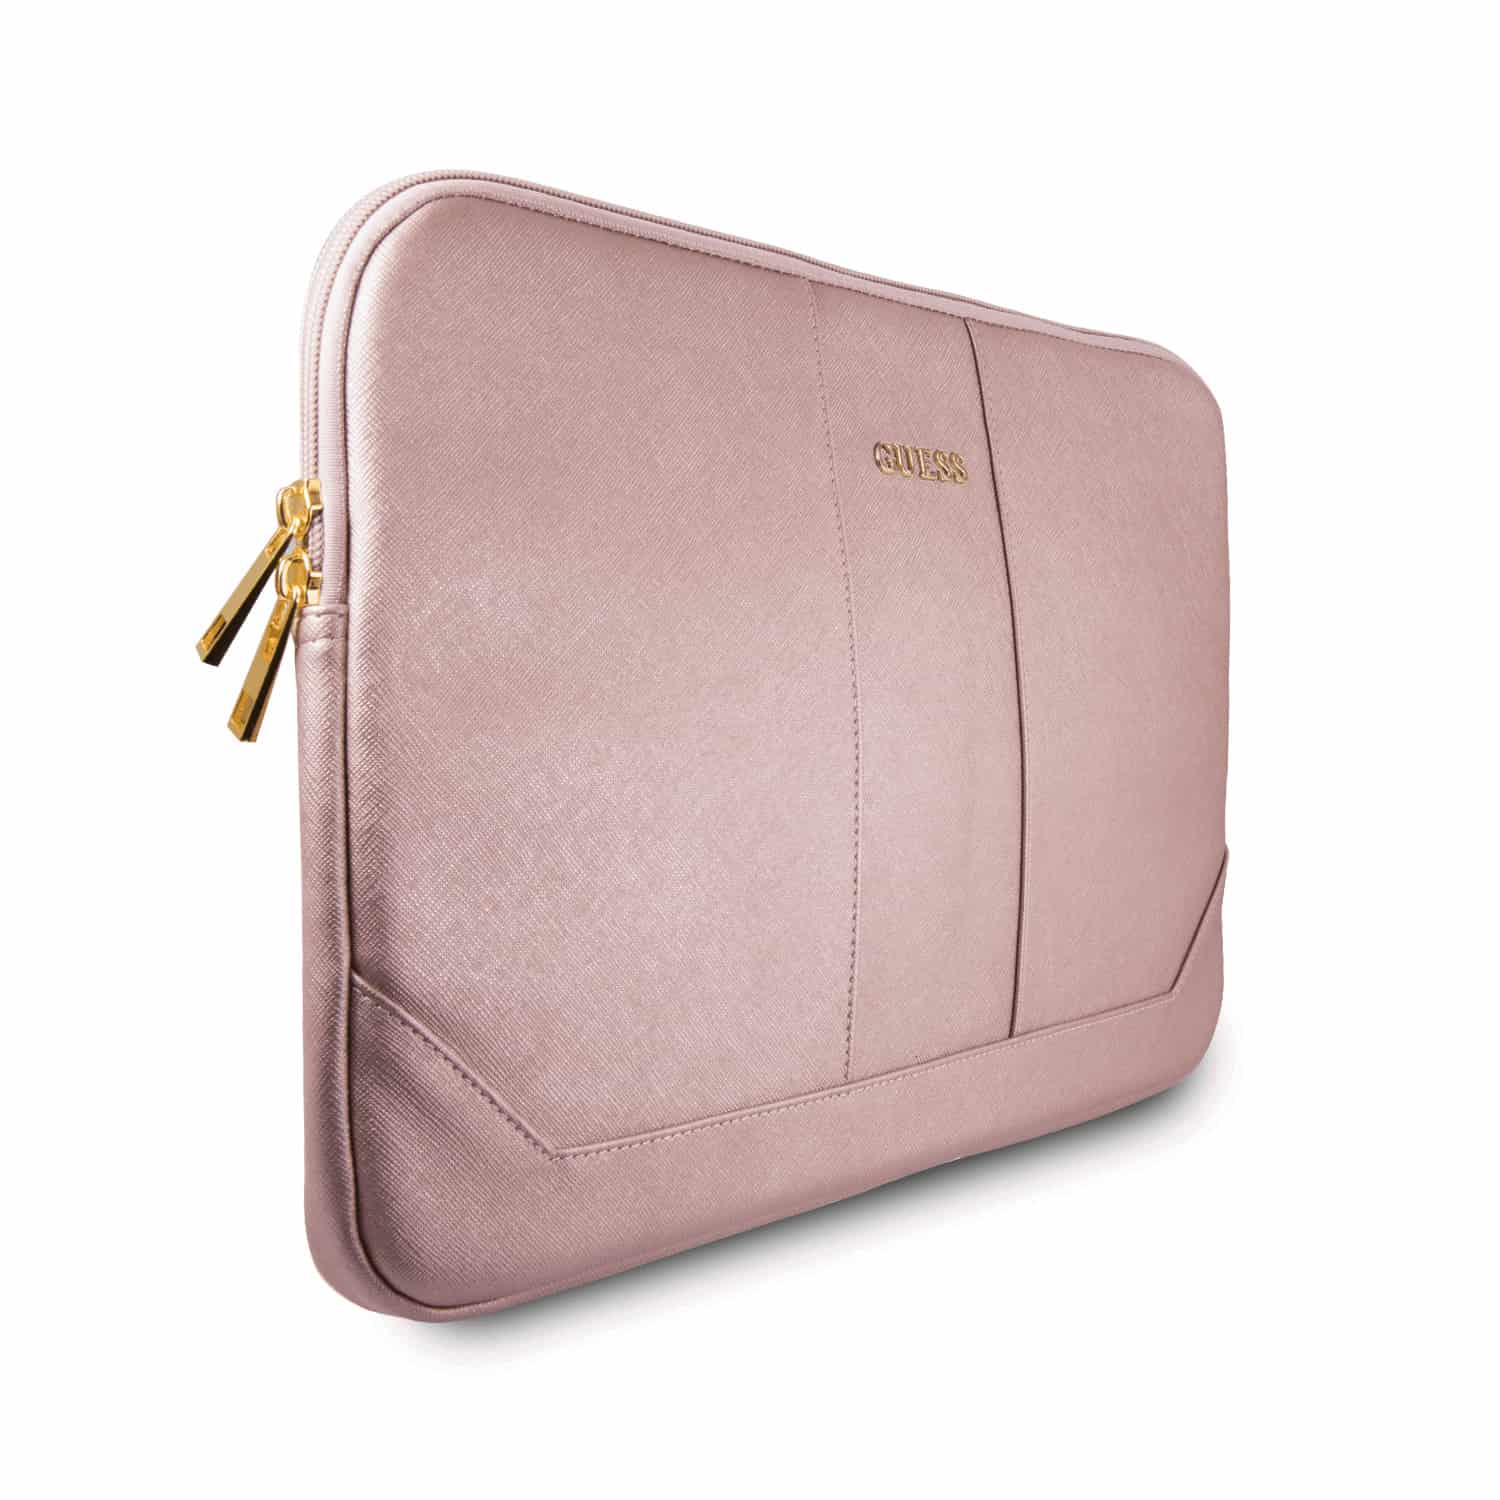 Budget Cellular Twitter: "GUESS Saffiano Computer Sleeve 13" @ R499 Colour: Pink See more: https://t.co/o13xPbHx20 Until stock lasts - E&amp;OE (T's &amp; C's apply) Contact info: https://t.co/2Fu1Dig5Lu FREE DELIVERY! #budgetcellular #